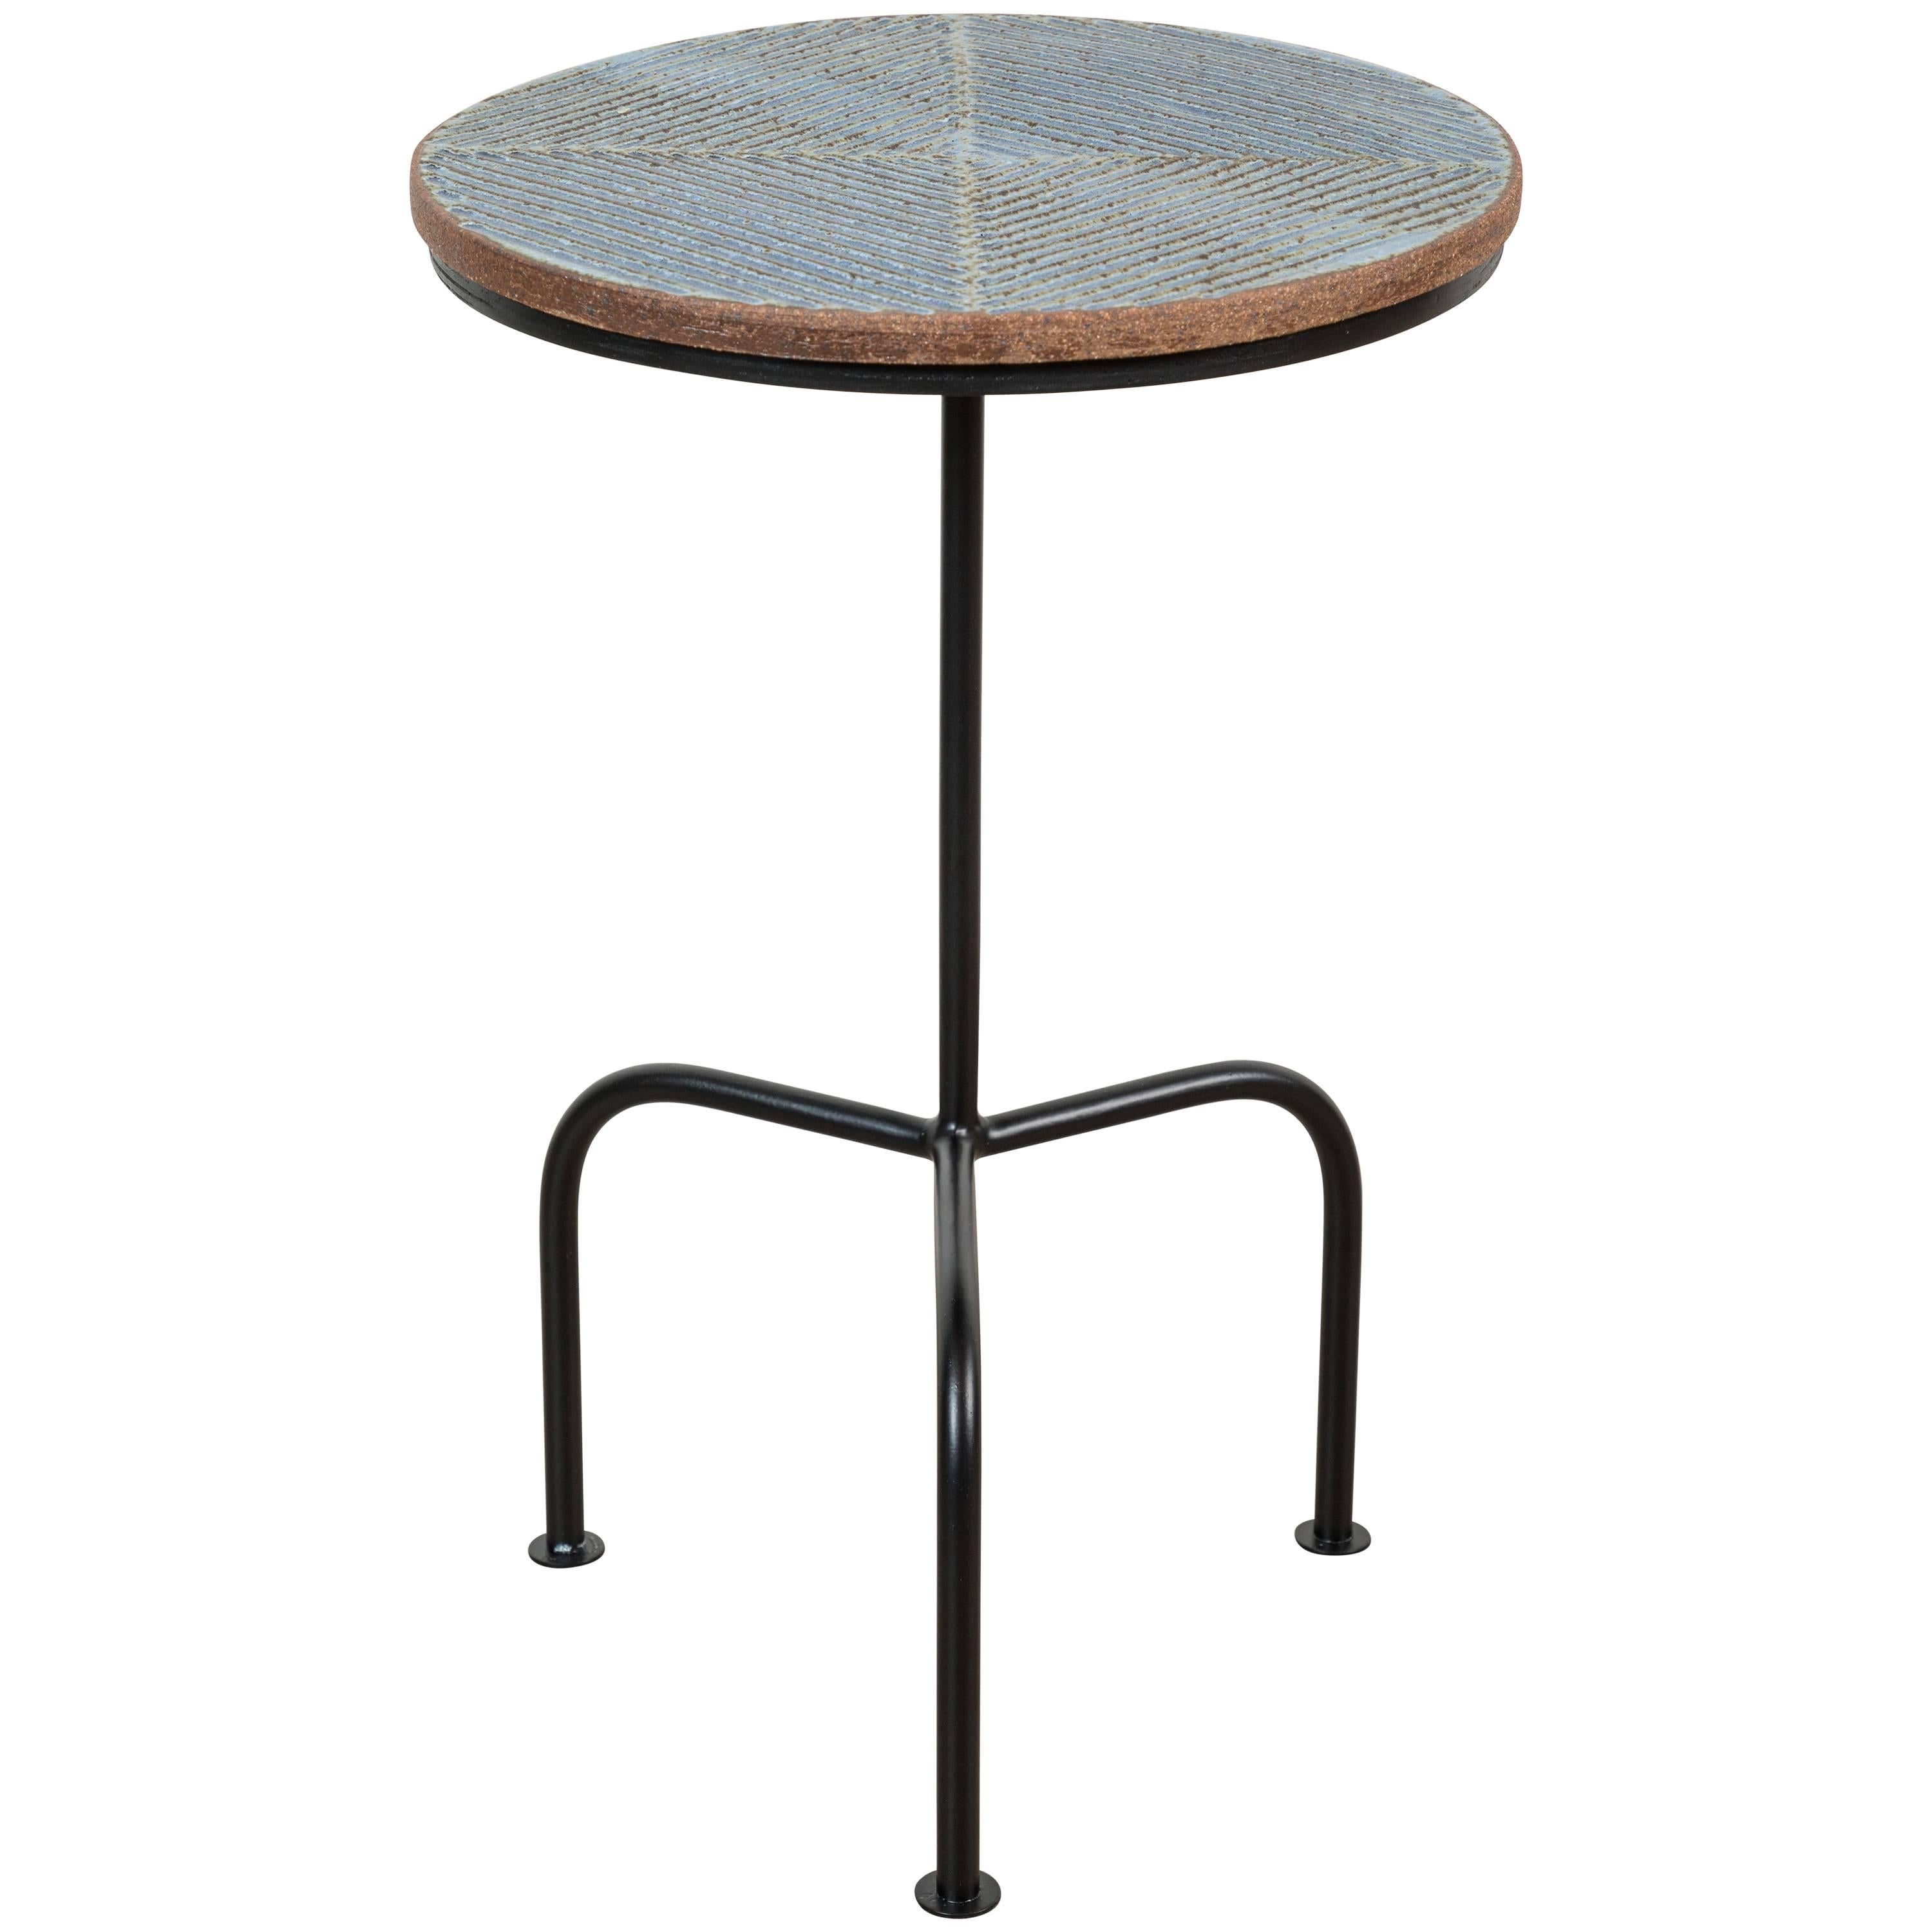 Steel and Ceramic Side Table by Mt. Washington Pottery for Lawson-Fenning